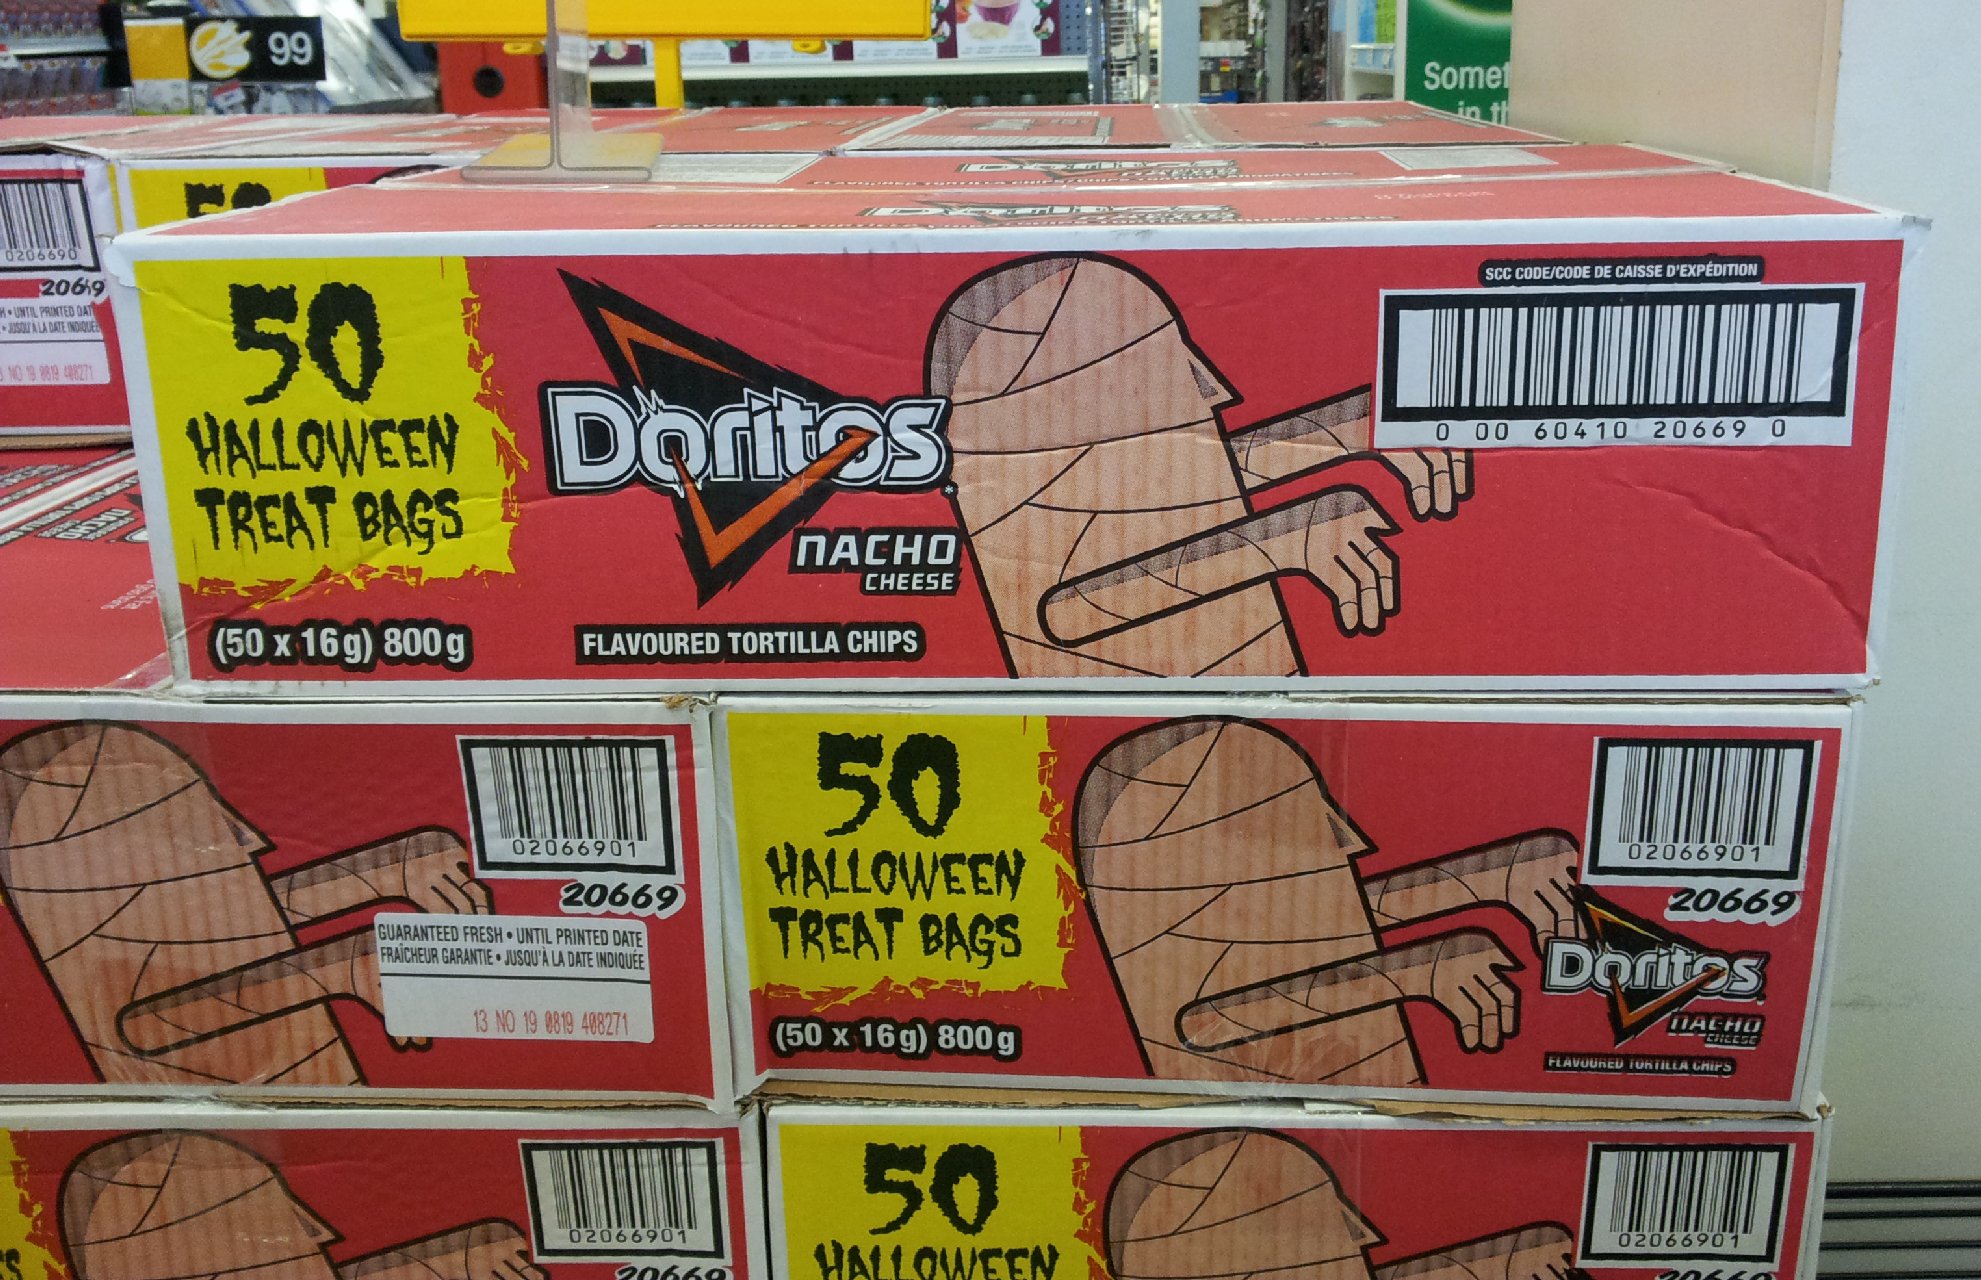 Saw this Doritos box while shopping I don't think I need to tell you what it looks like